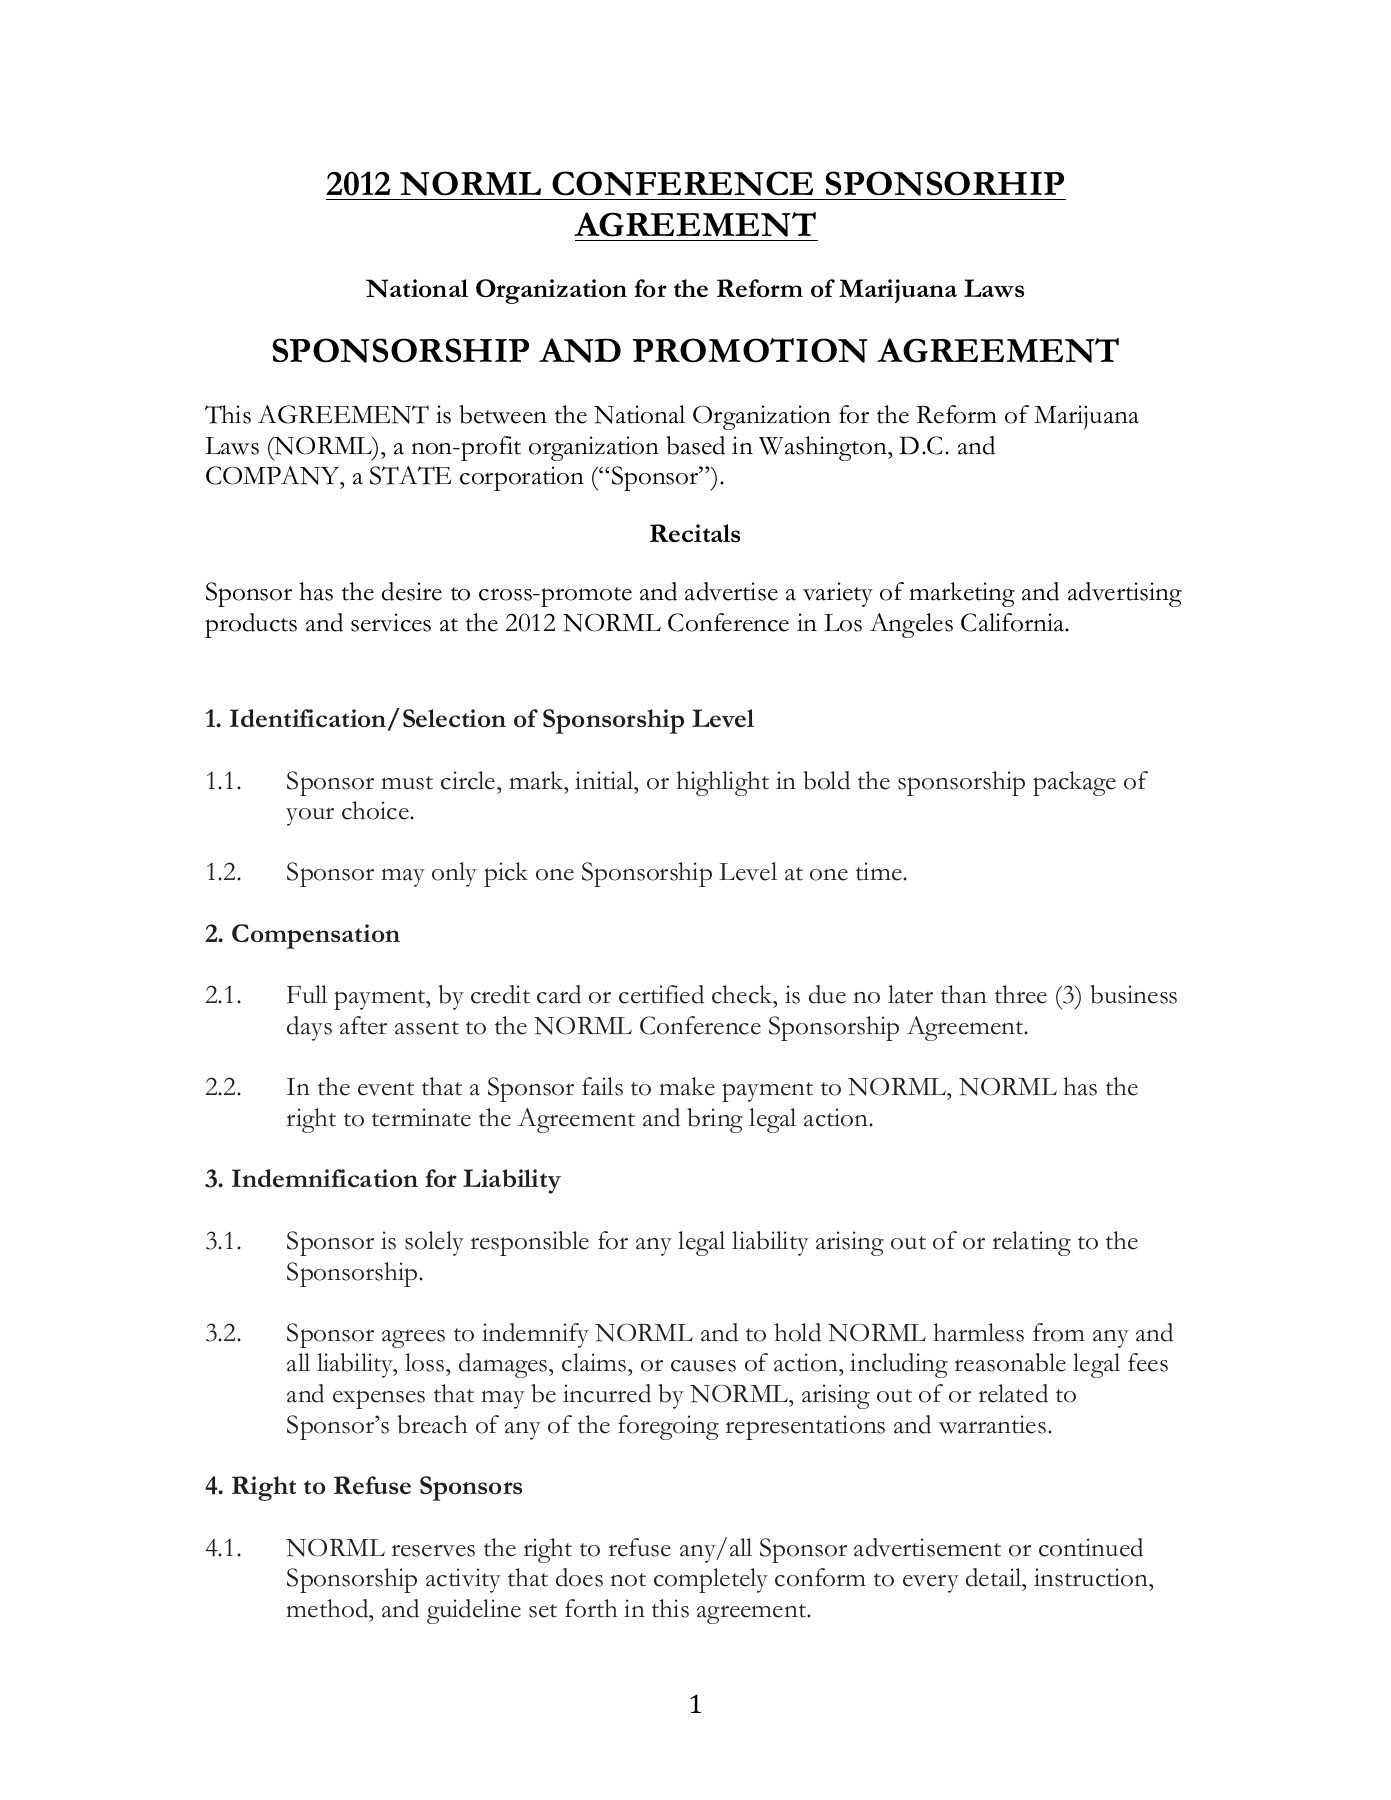 Promotion Agreement Template Sponsorship And Promotion Agreement Norml